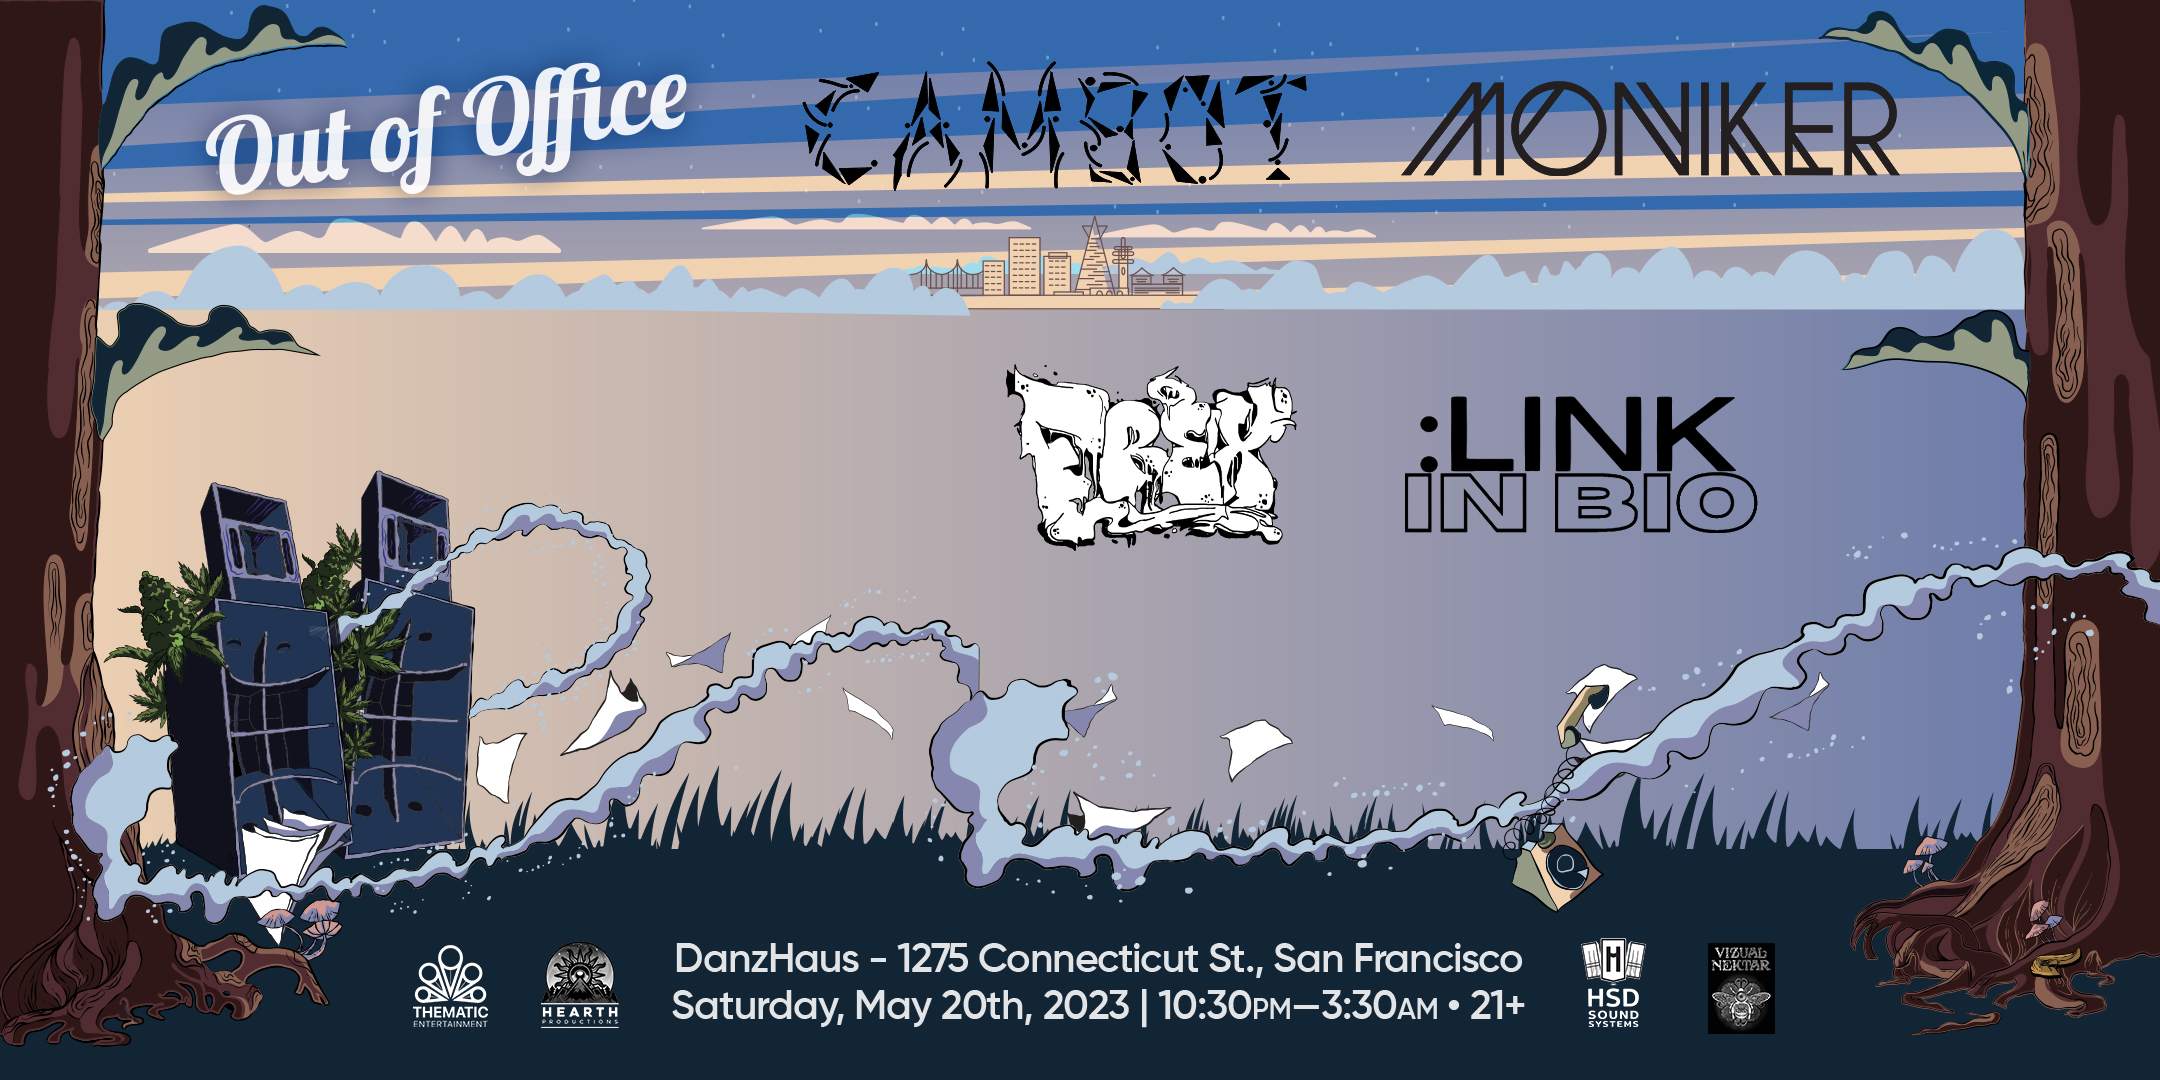 Out of Office #08: Cambot, Moniker, Frex, LinkInBio - フライヤー表